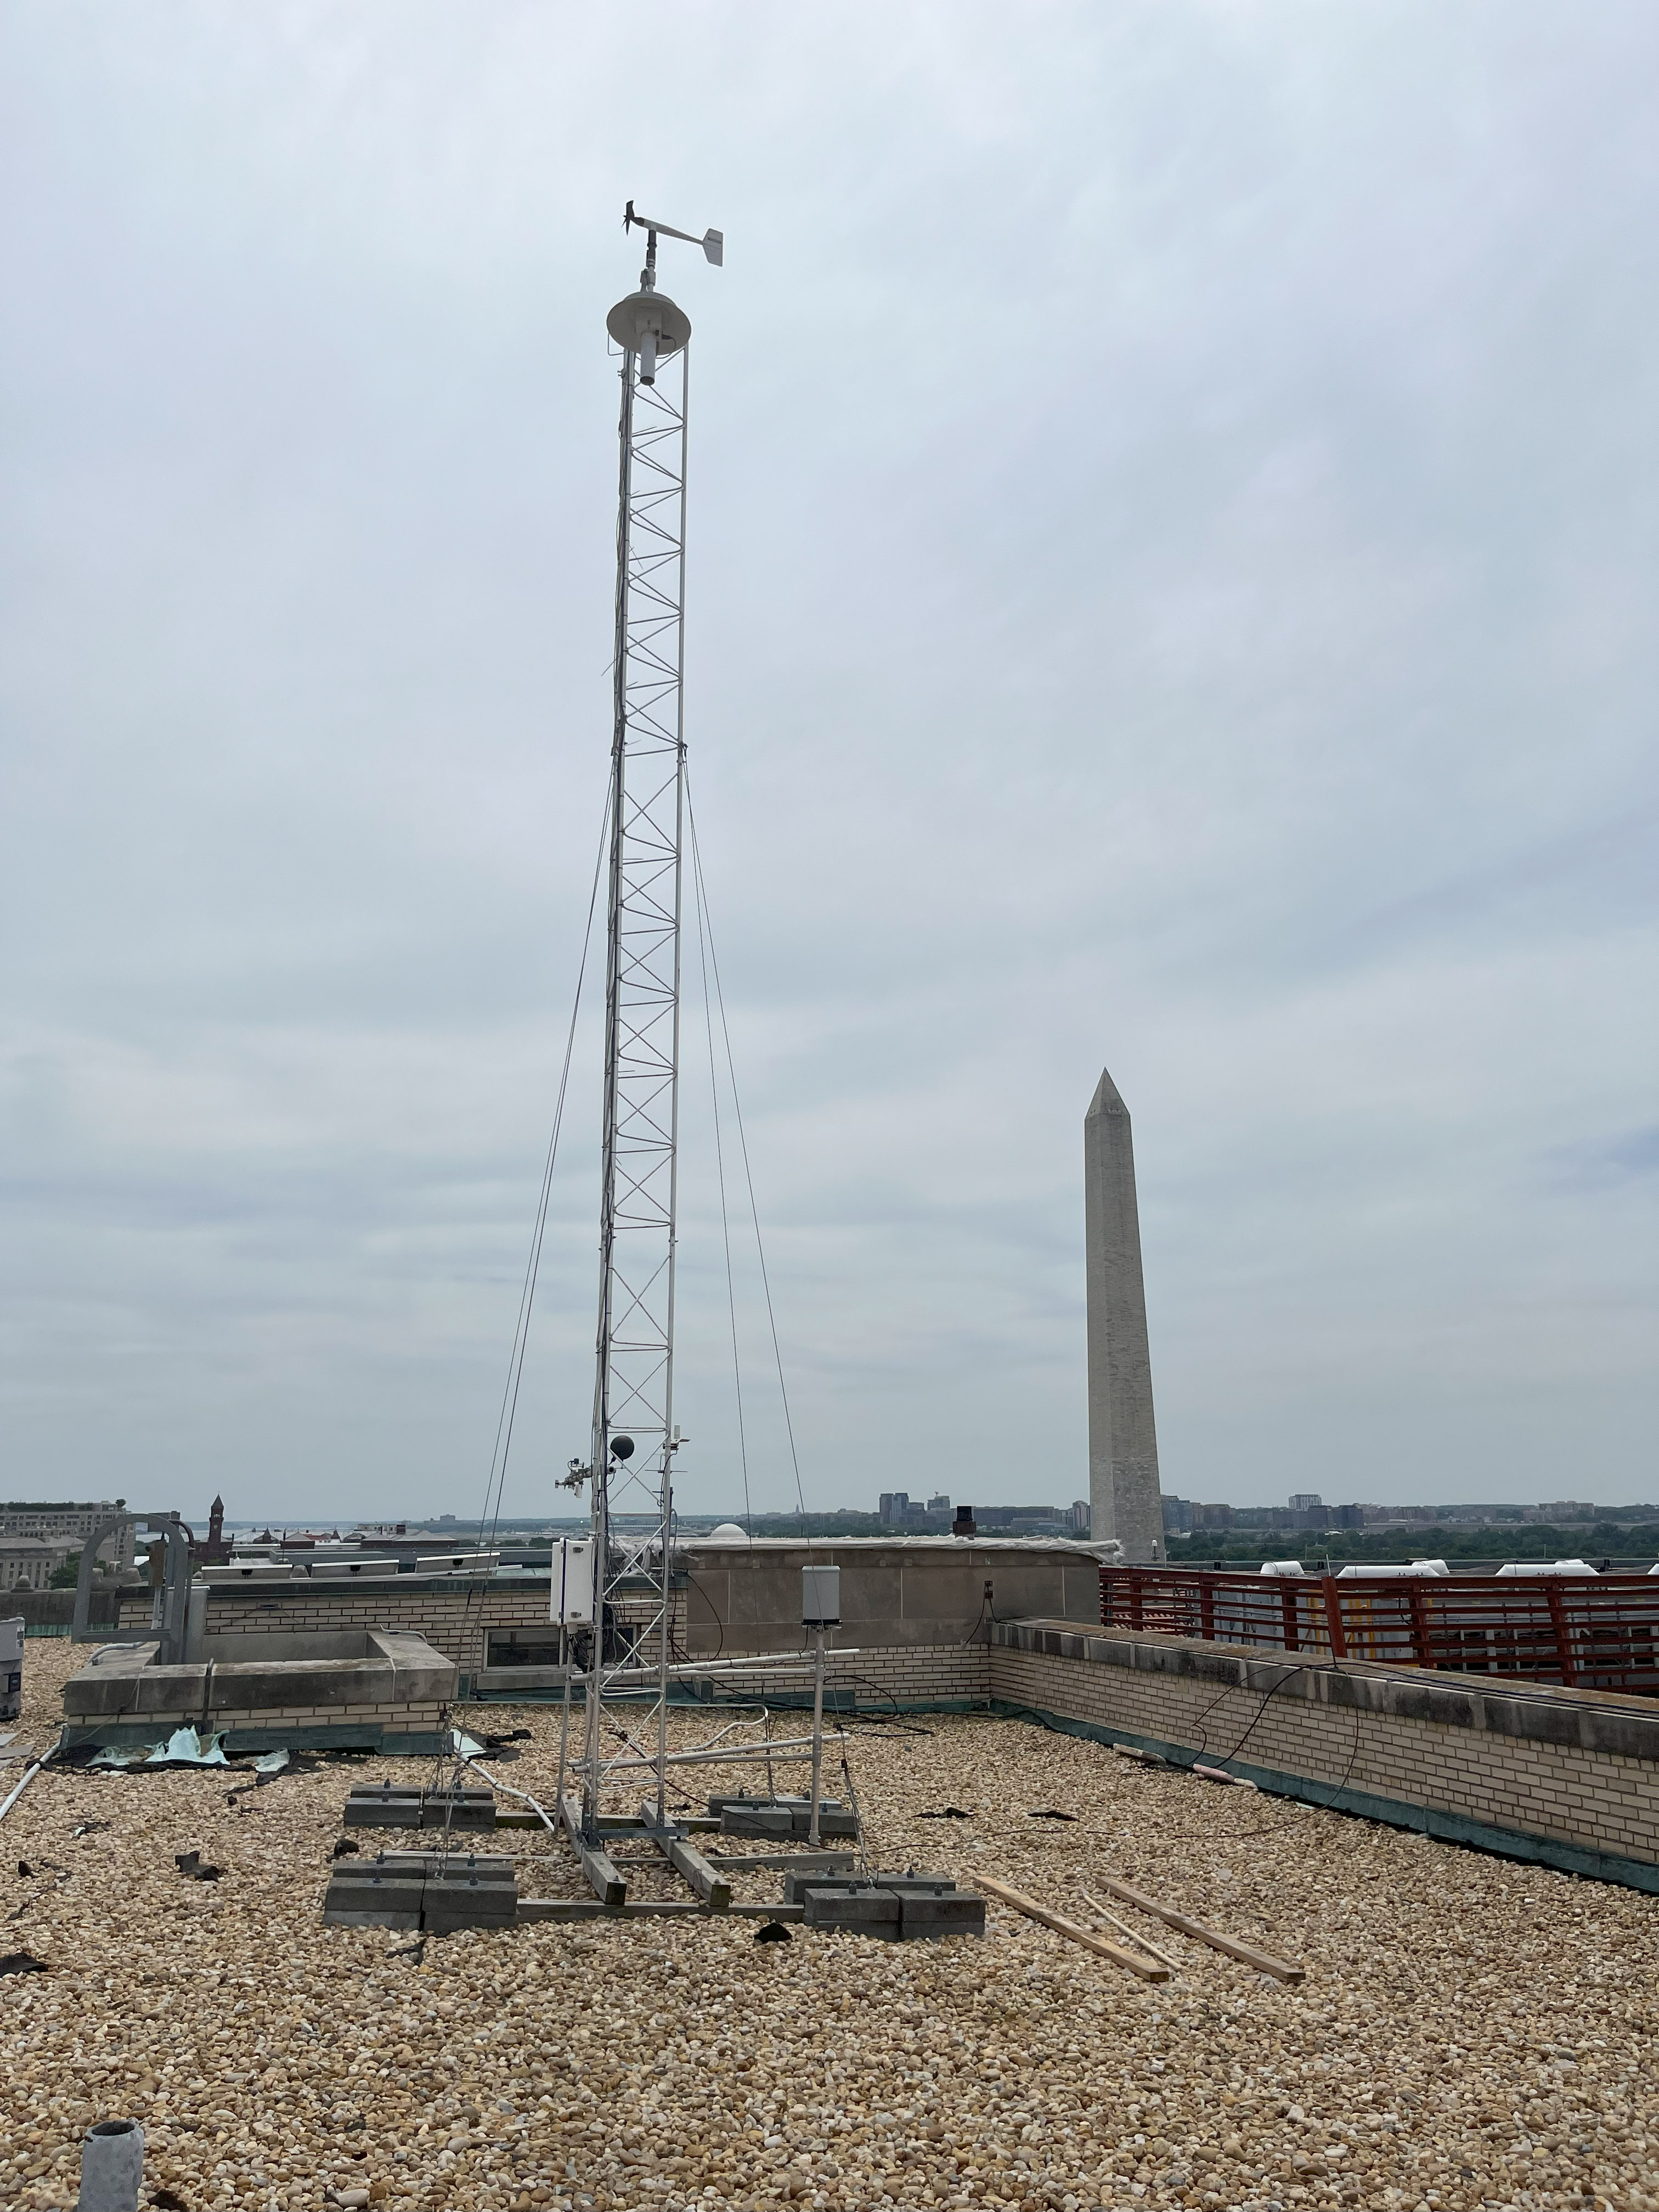 Tower made of metal scaffolding mounted on a flat rooftop with the Washington Monument in the background.